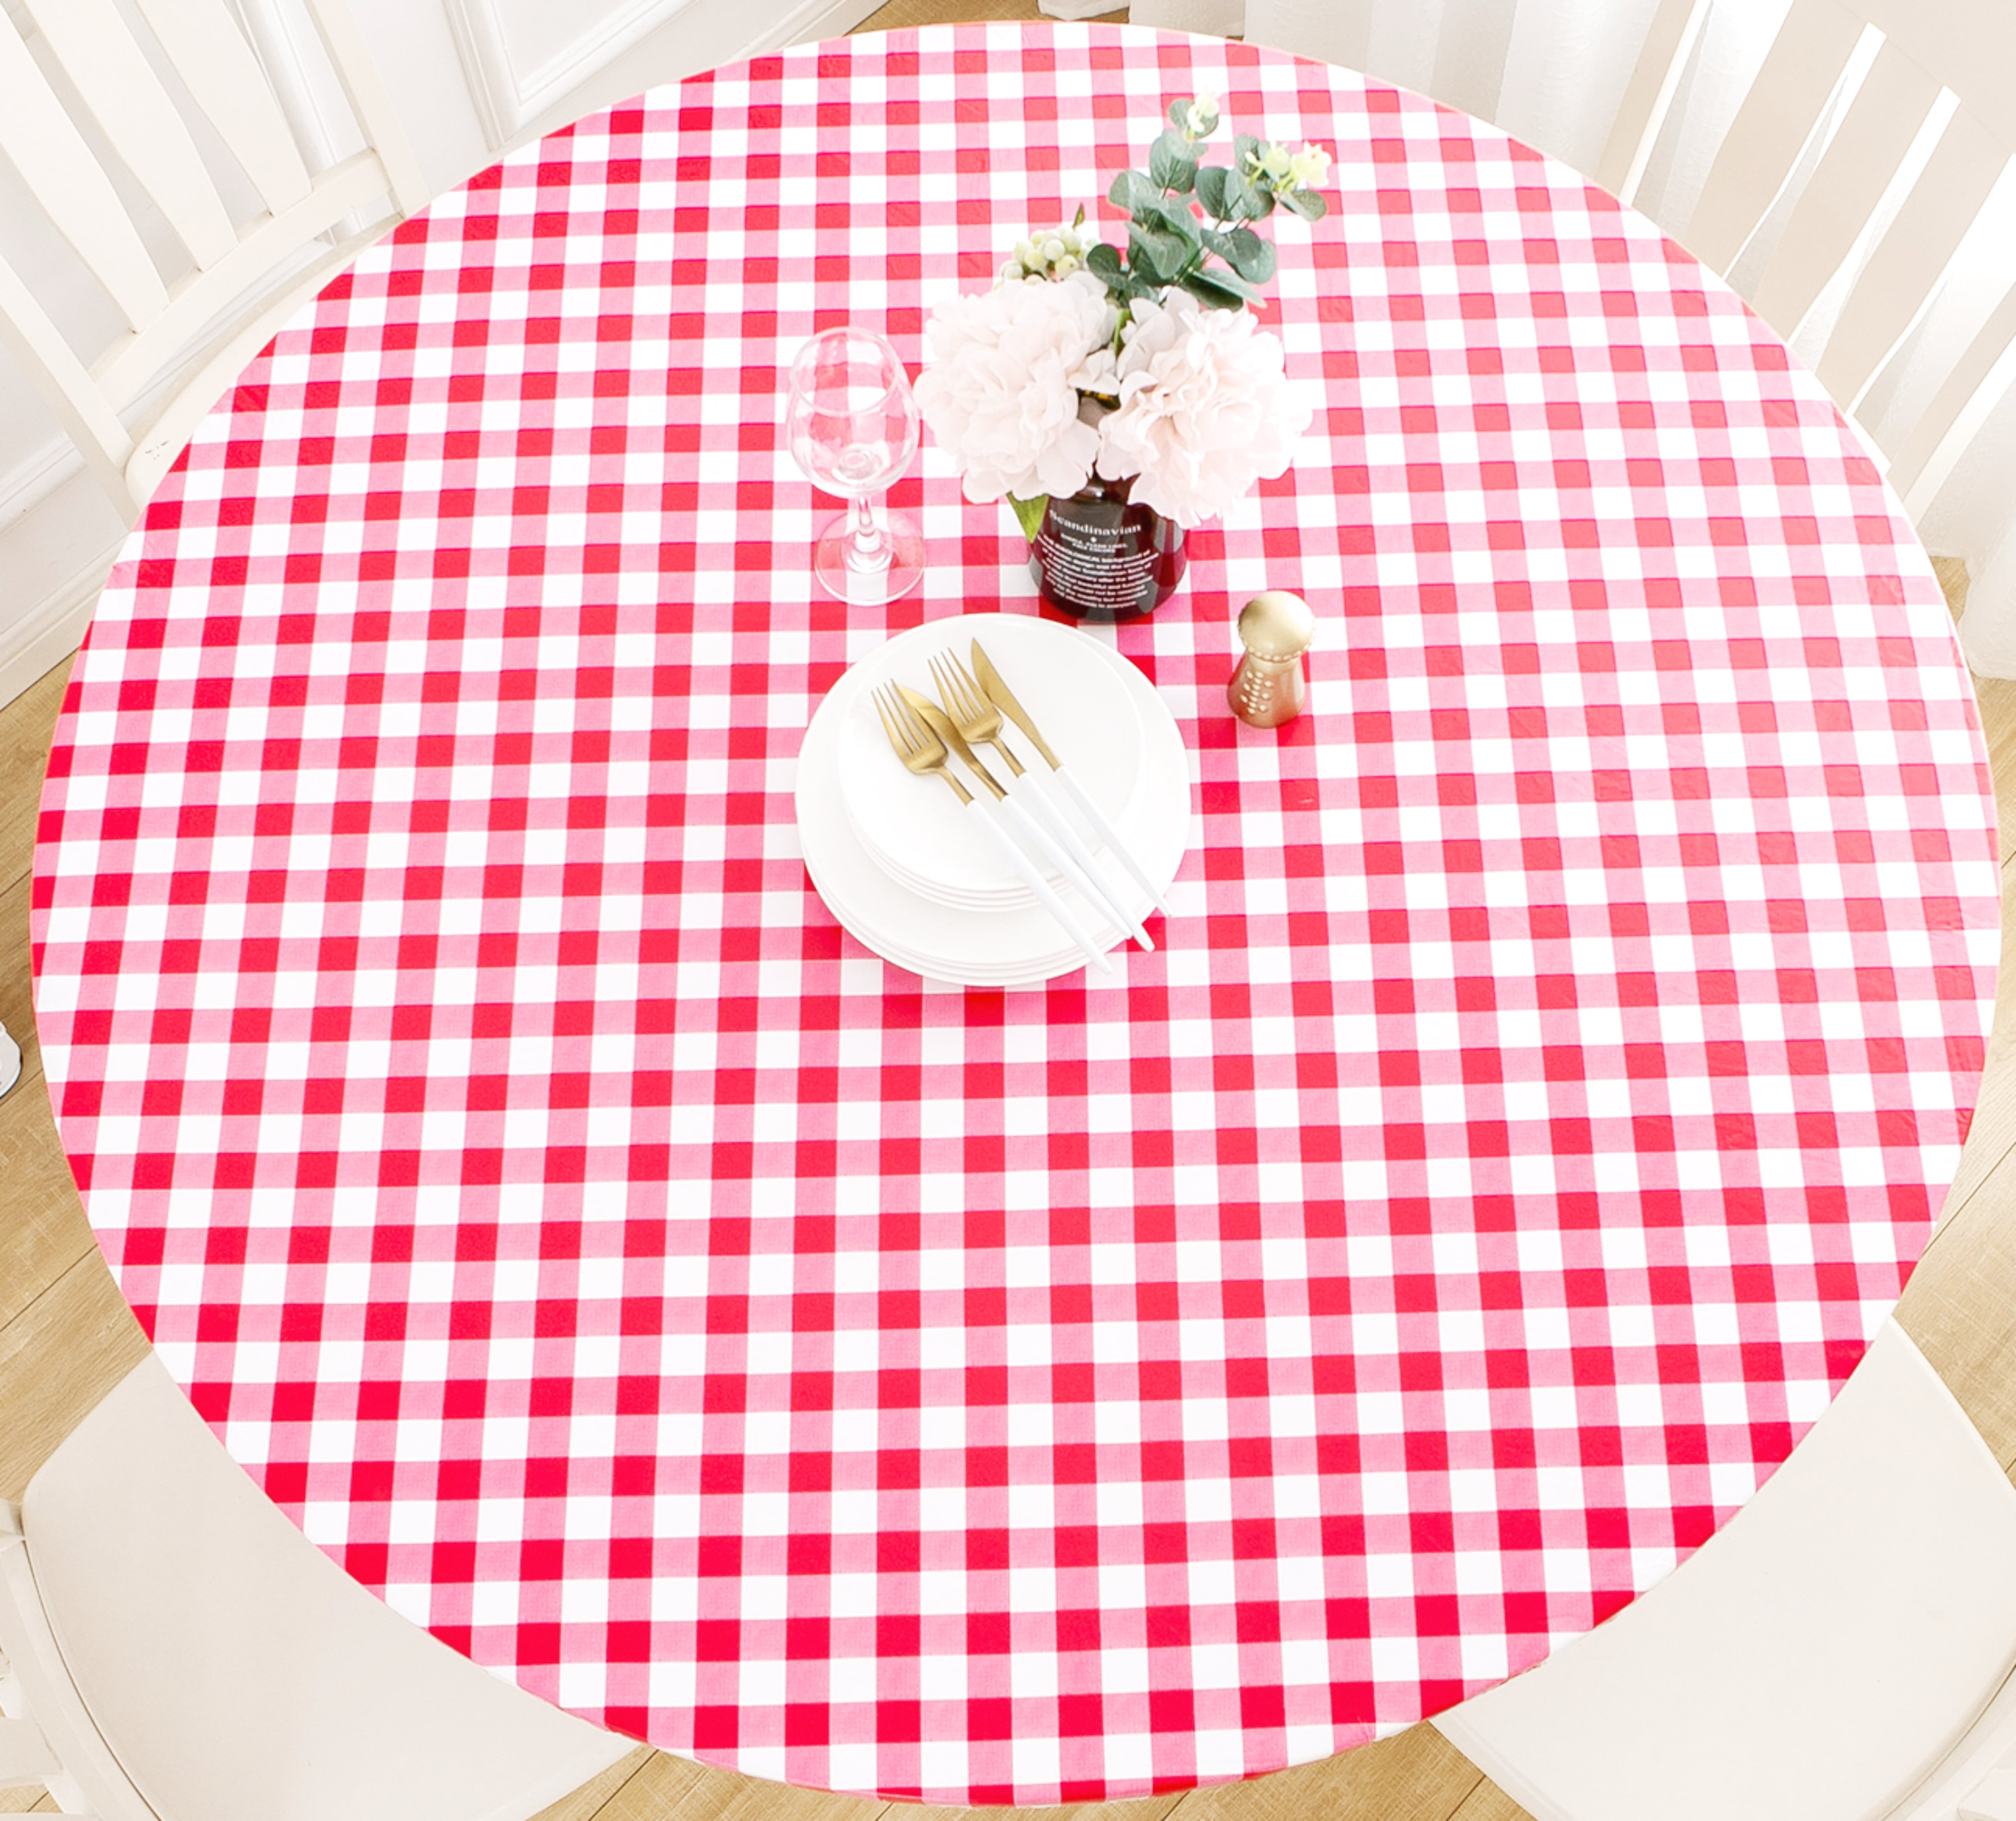 LKHF Indoor Outdoor Patio Round Fitted Vinyl Tablecloth Flannel Elastic Edge Waterproof Plastic Cover